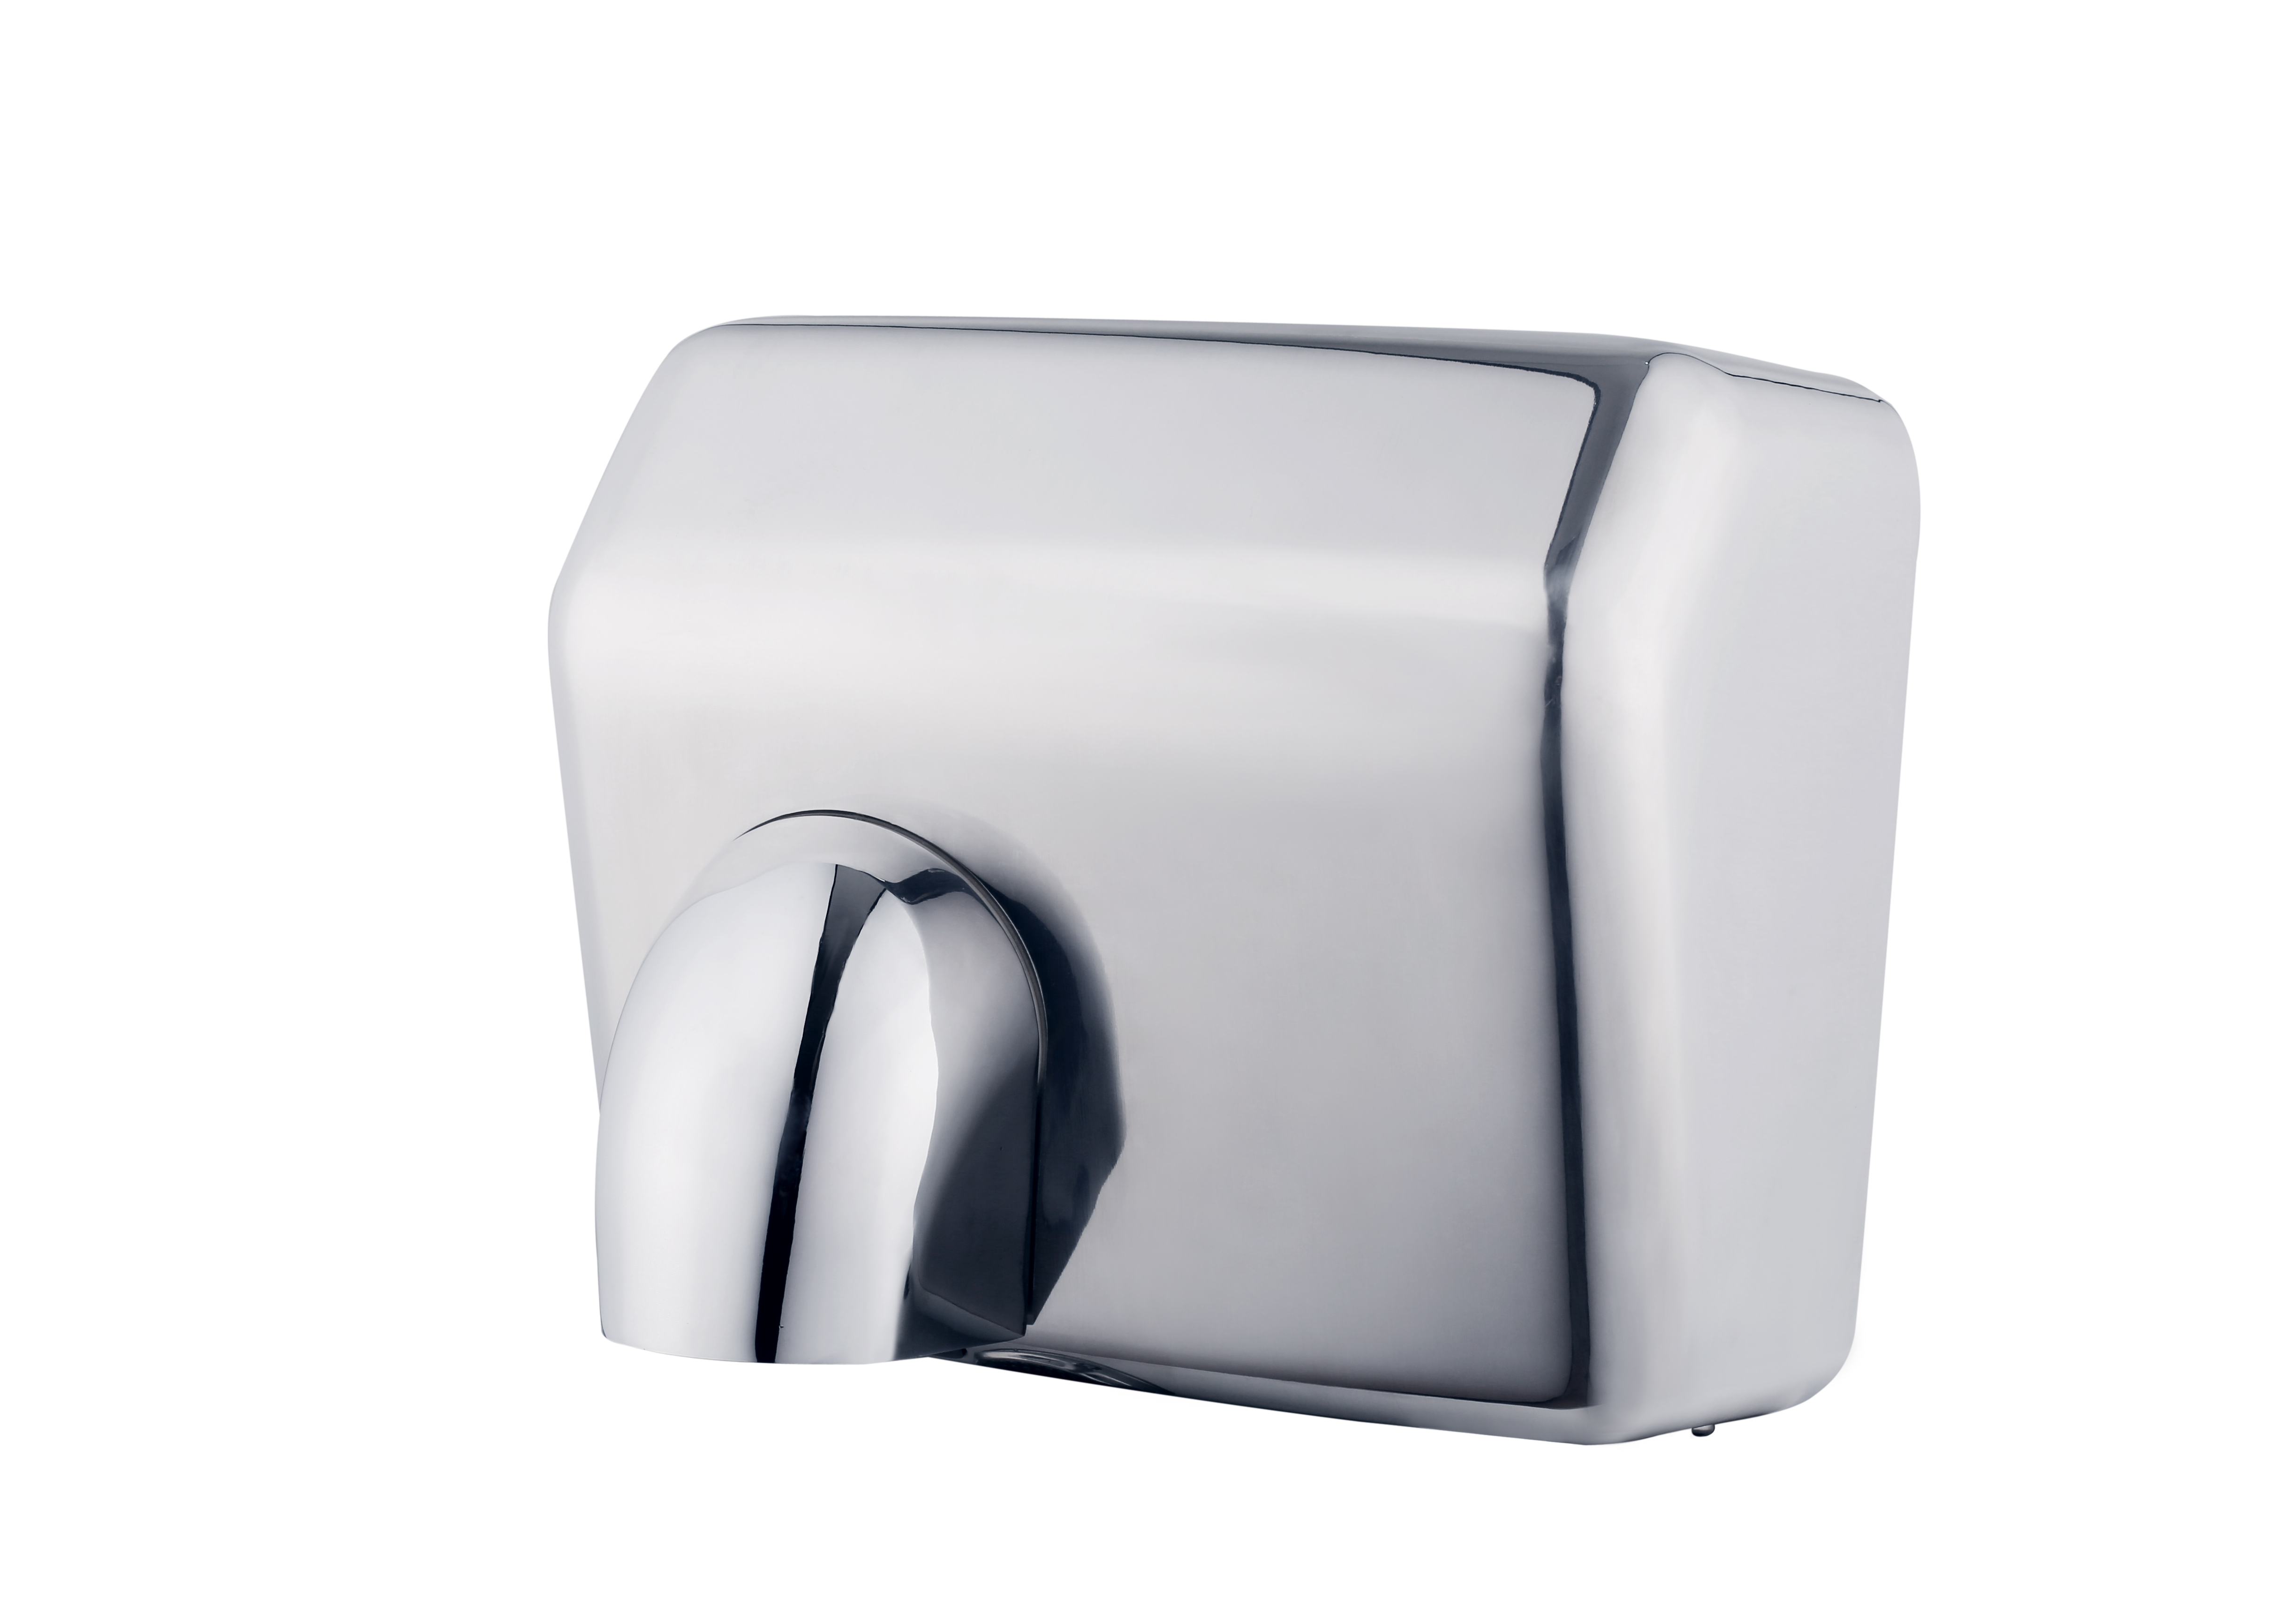 Stainless Steel Automatic Sensor Hand Dryer